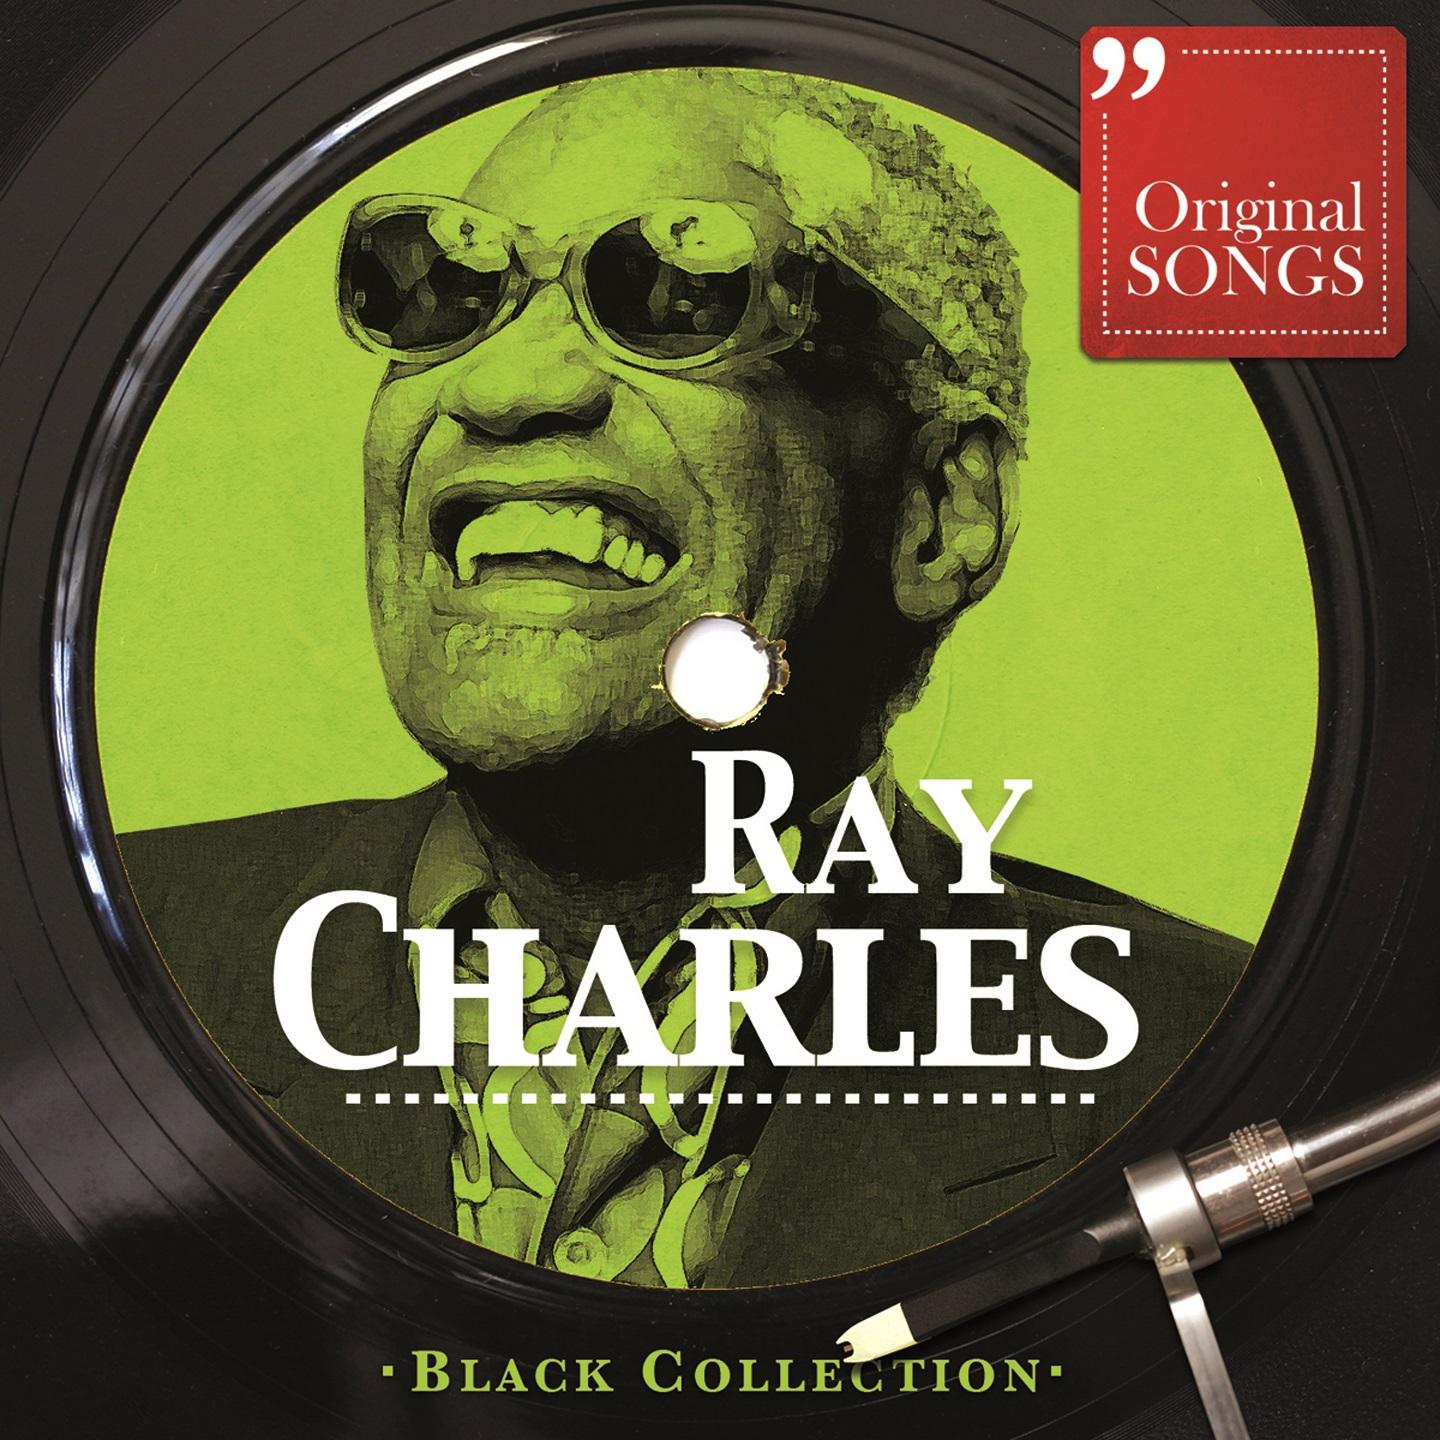 Black Collection: Ray Charles